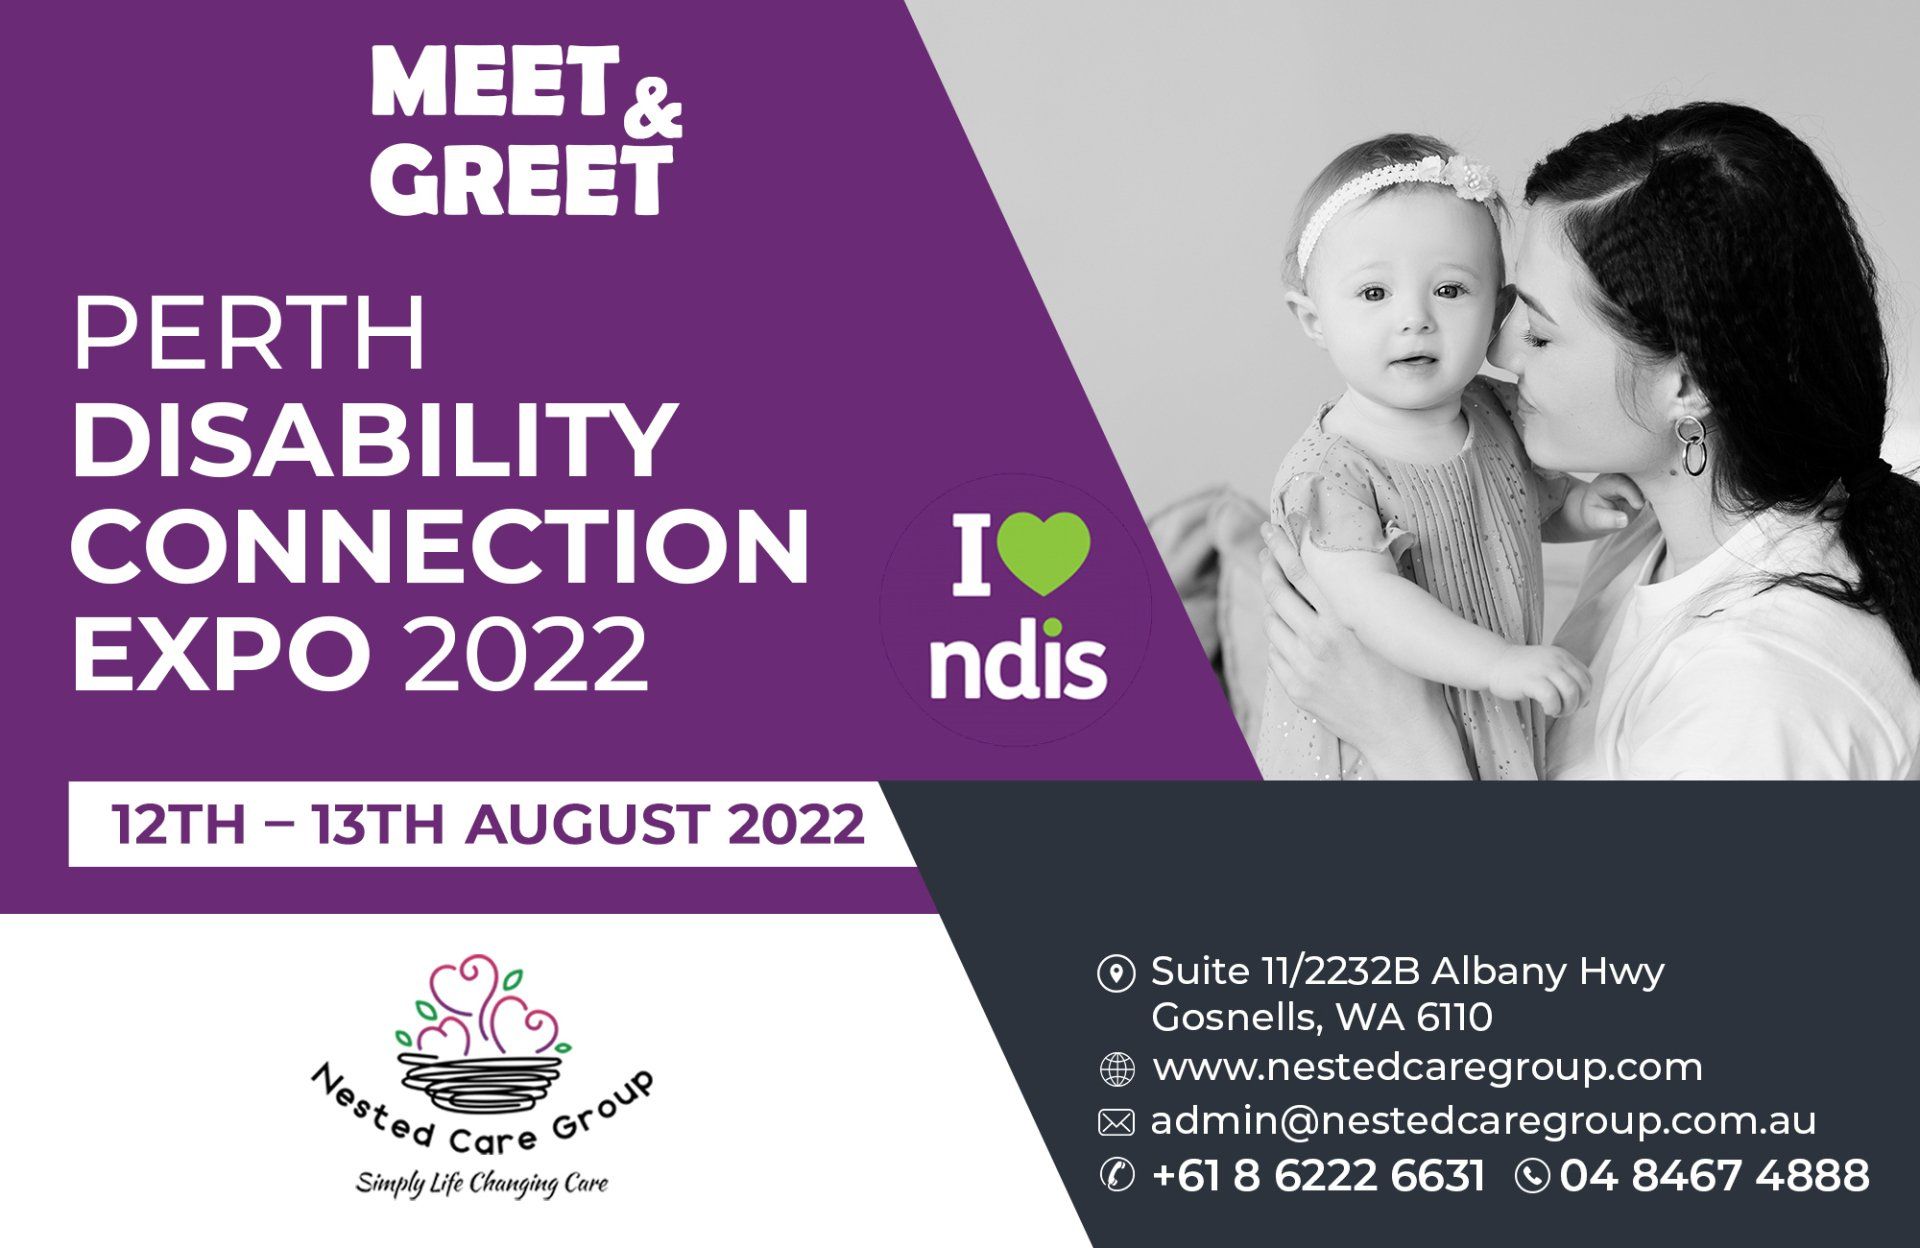 Perth Disability Connection Expo 2022